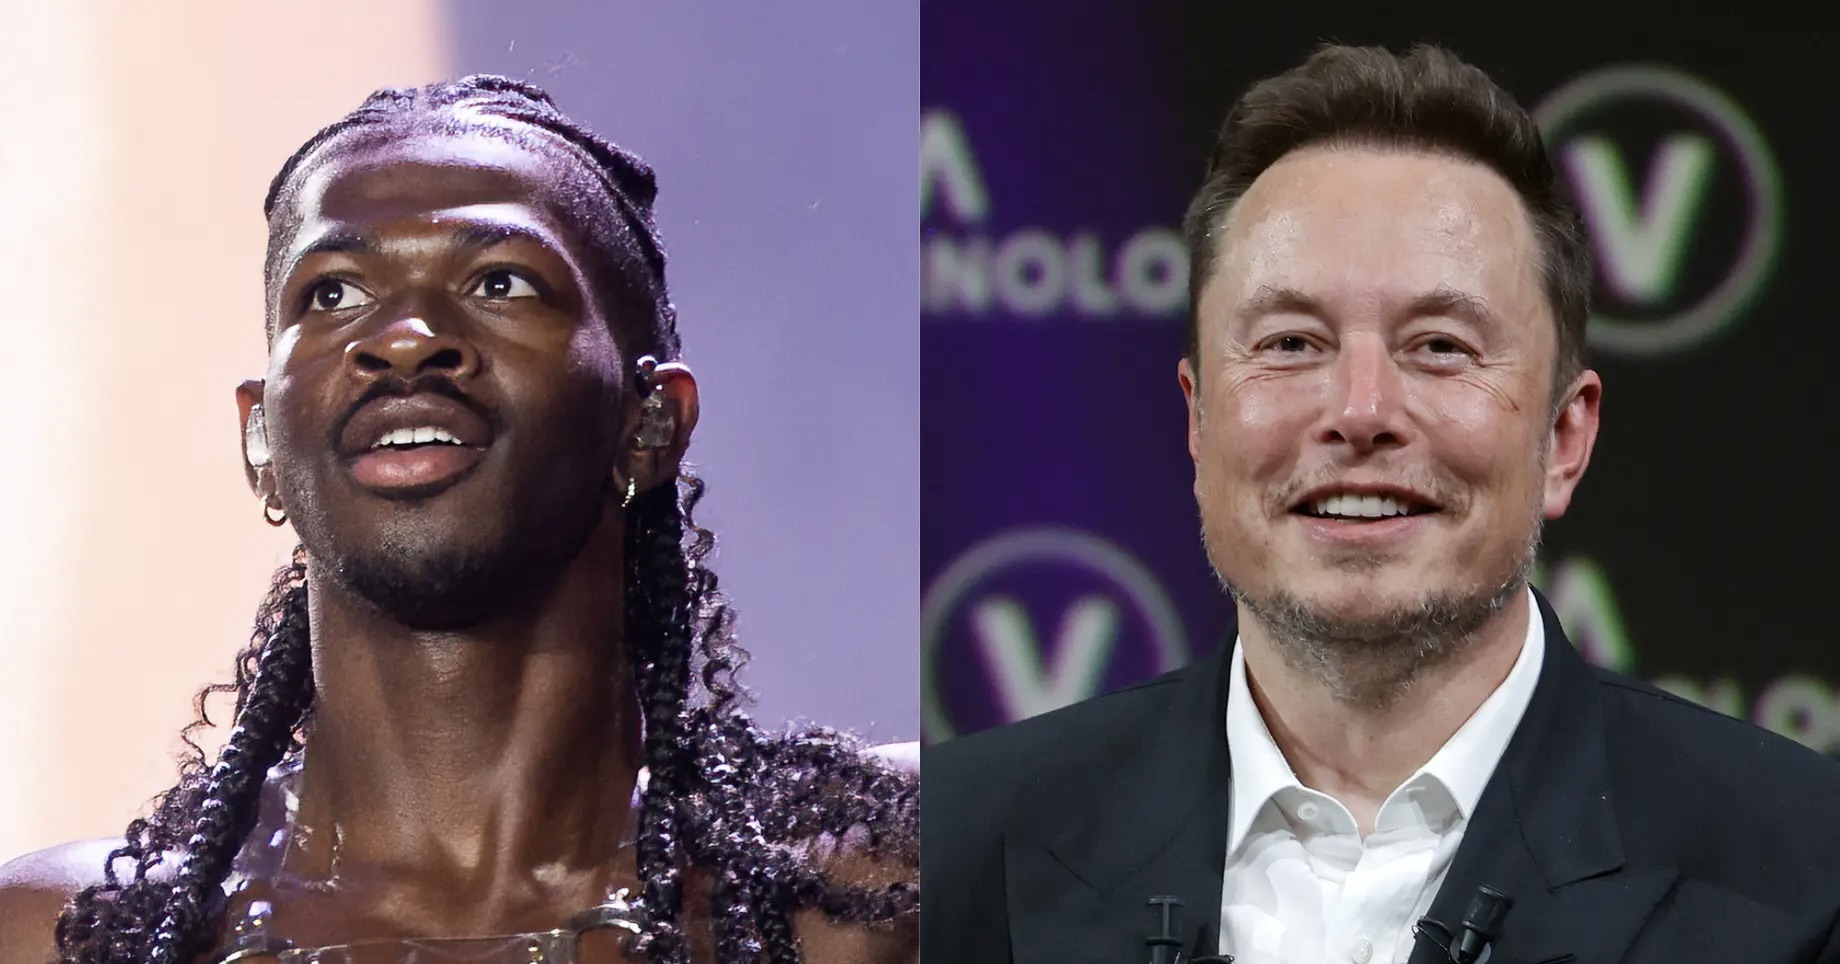 Lil Nas X Seems Thrilled About Elon Musk’s Decision to Change Twitter’s Name to ‘X’ [Photos]